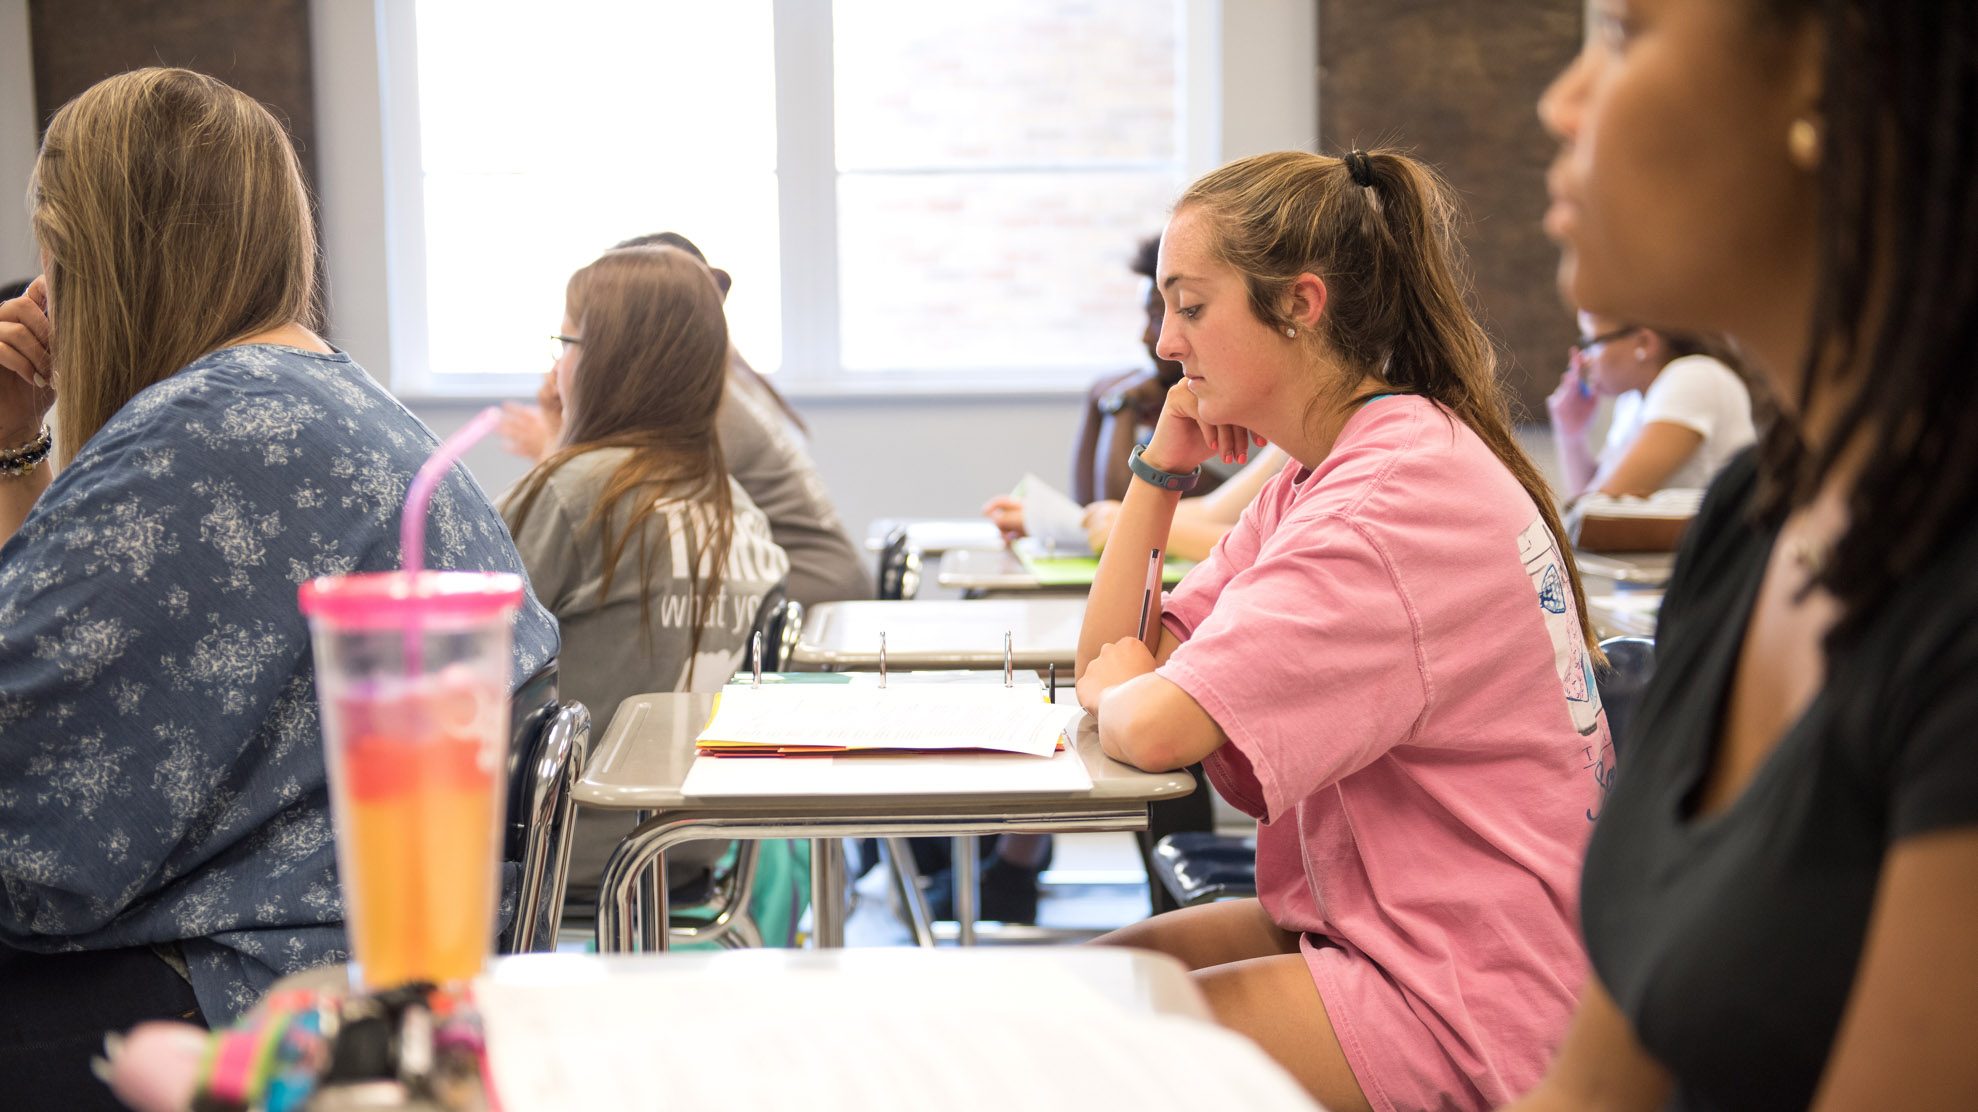 Students in class sitting at desks with notebooks open.